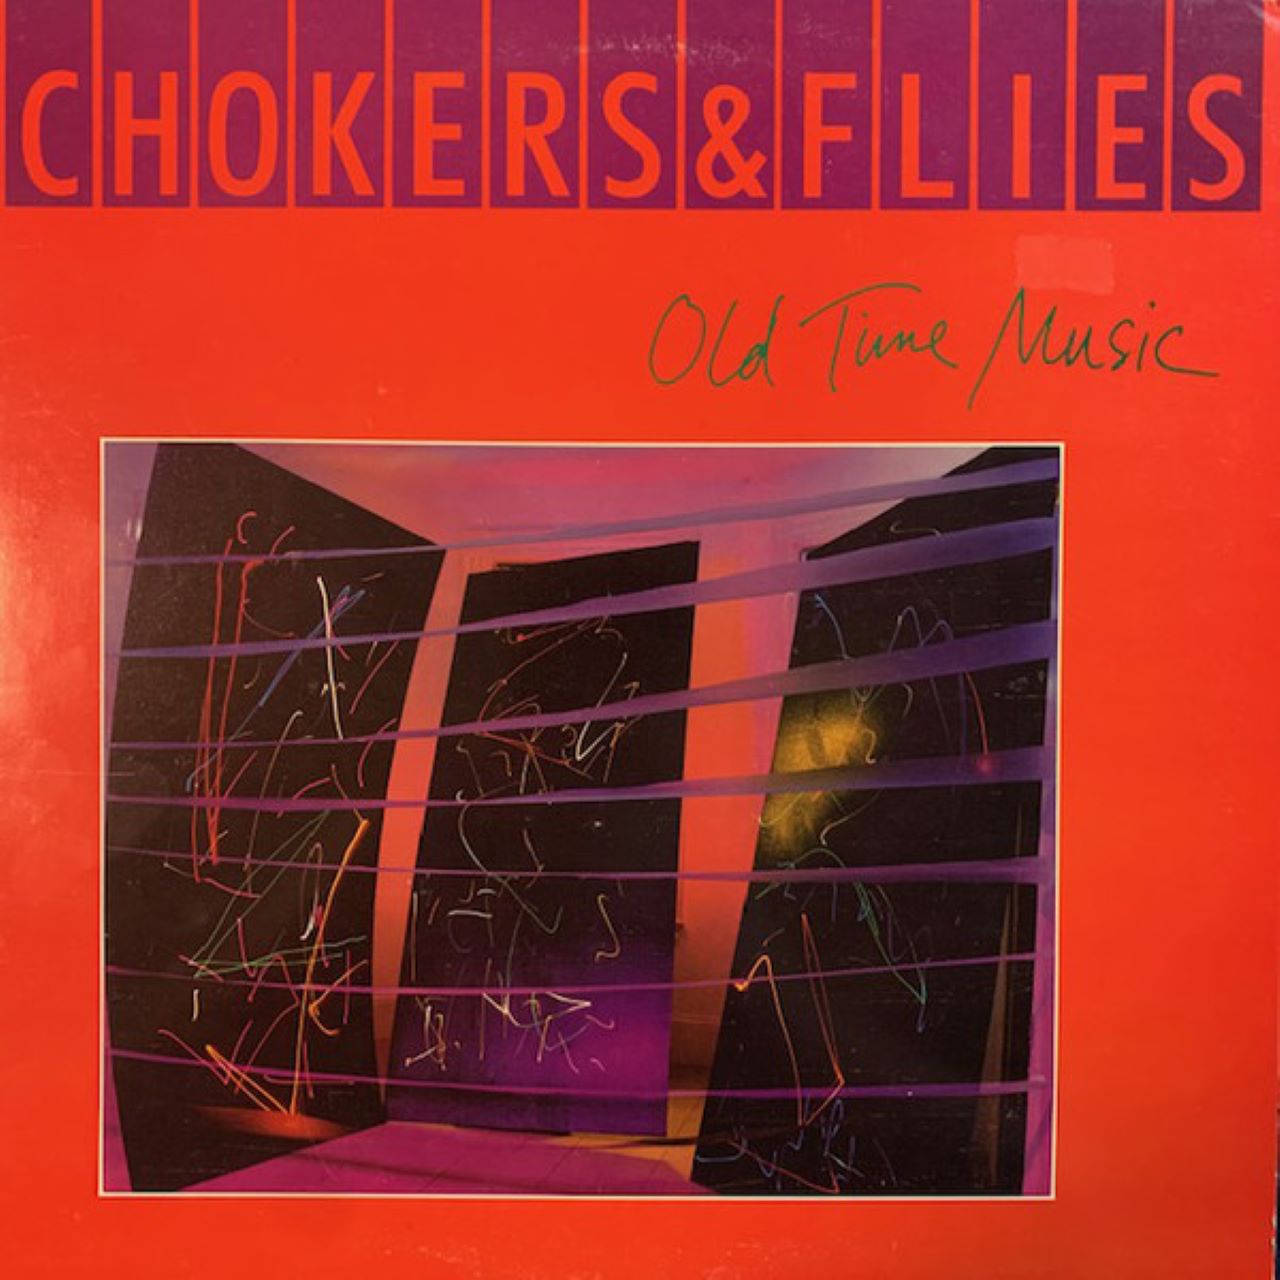 Chokers & Flies - Old Time Music cover album